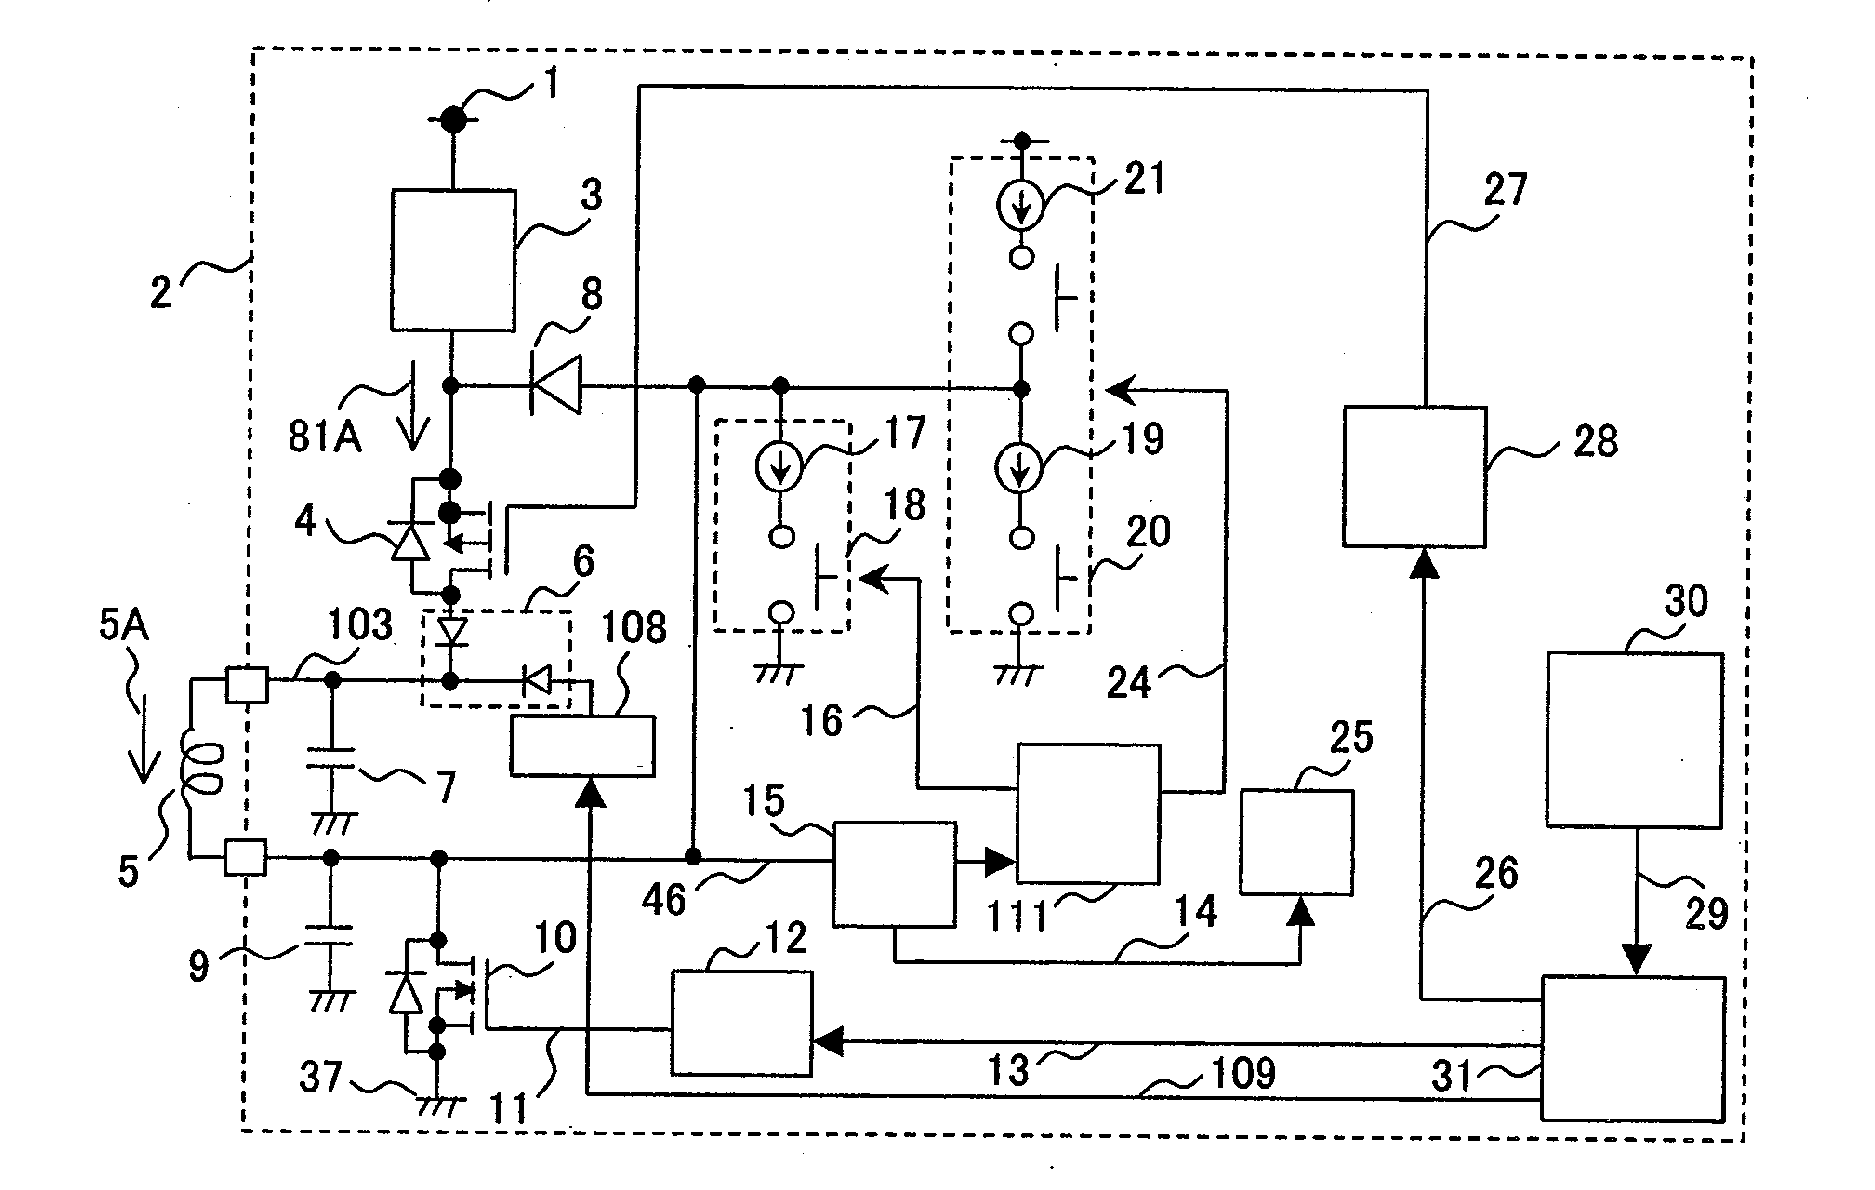 Electromagnetic Load Controller